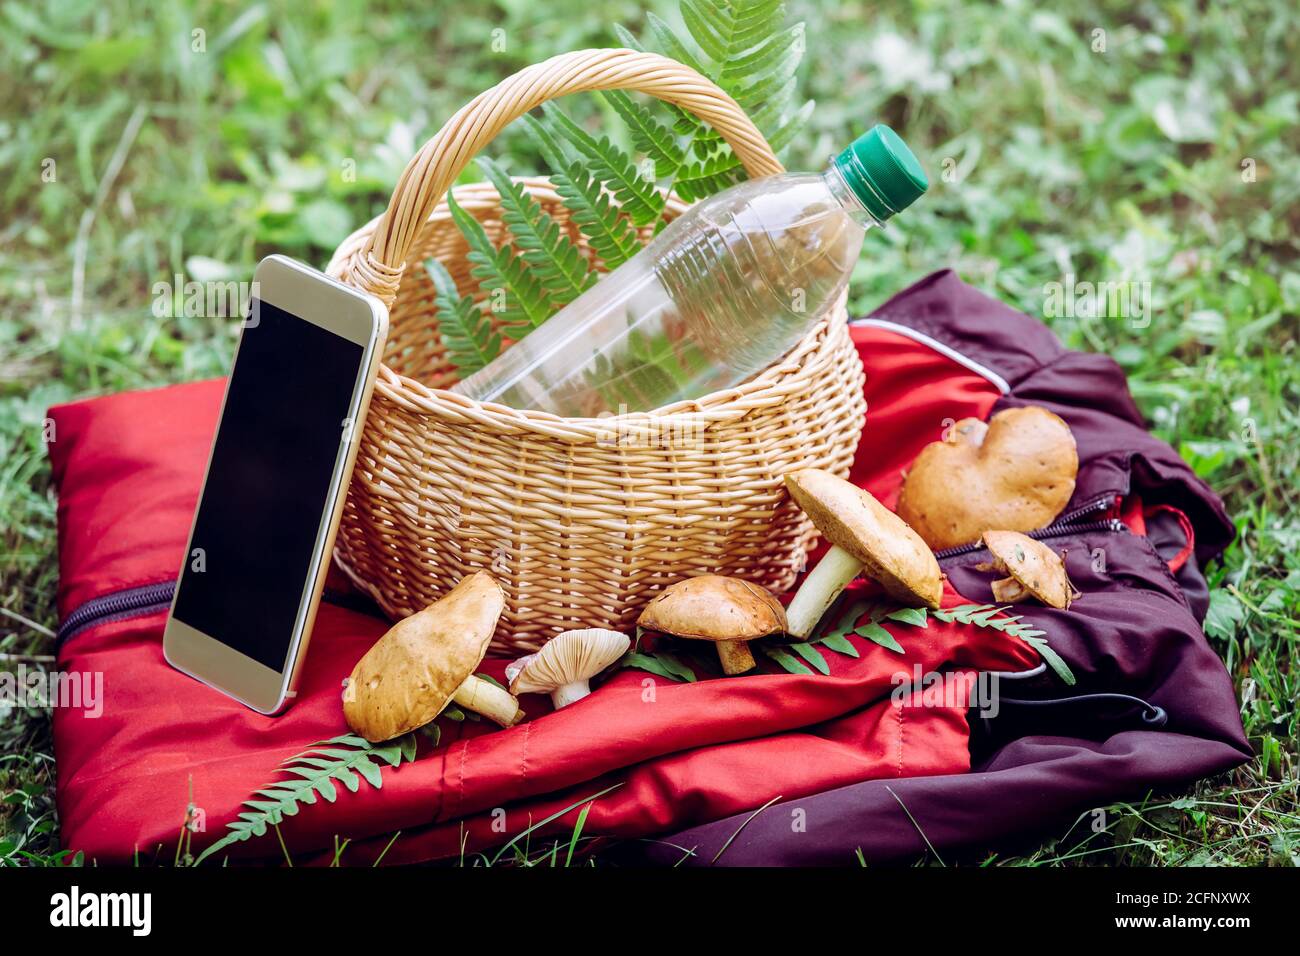 When going to the mushroom picking, bring a charged phone, a water bottle and a warm colored jacket in case of getting lost in the forest. Survival ki Stock Photo